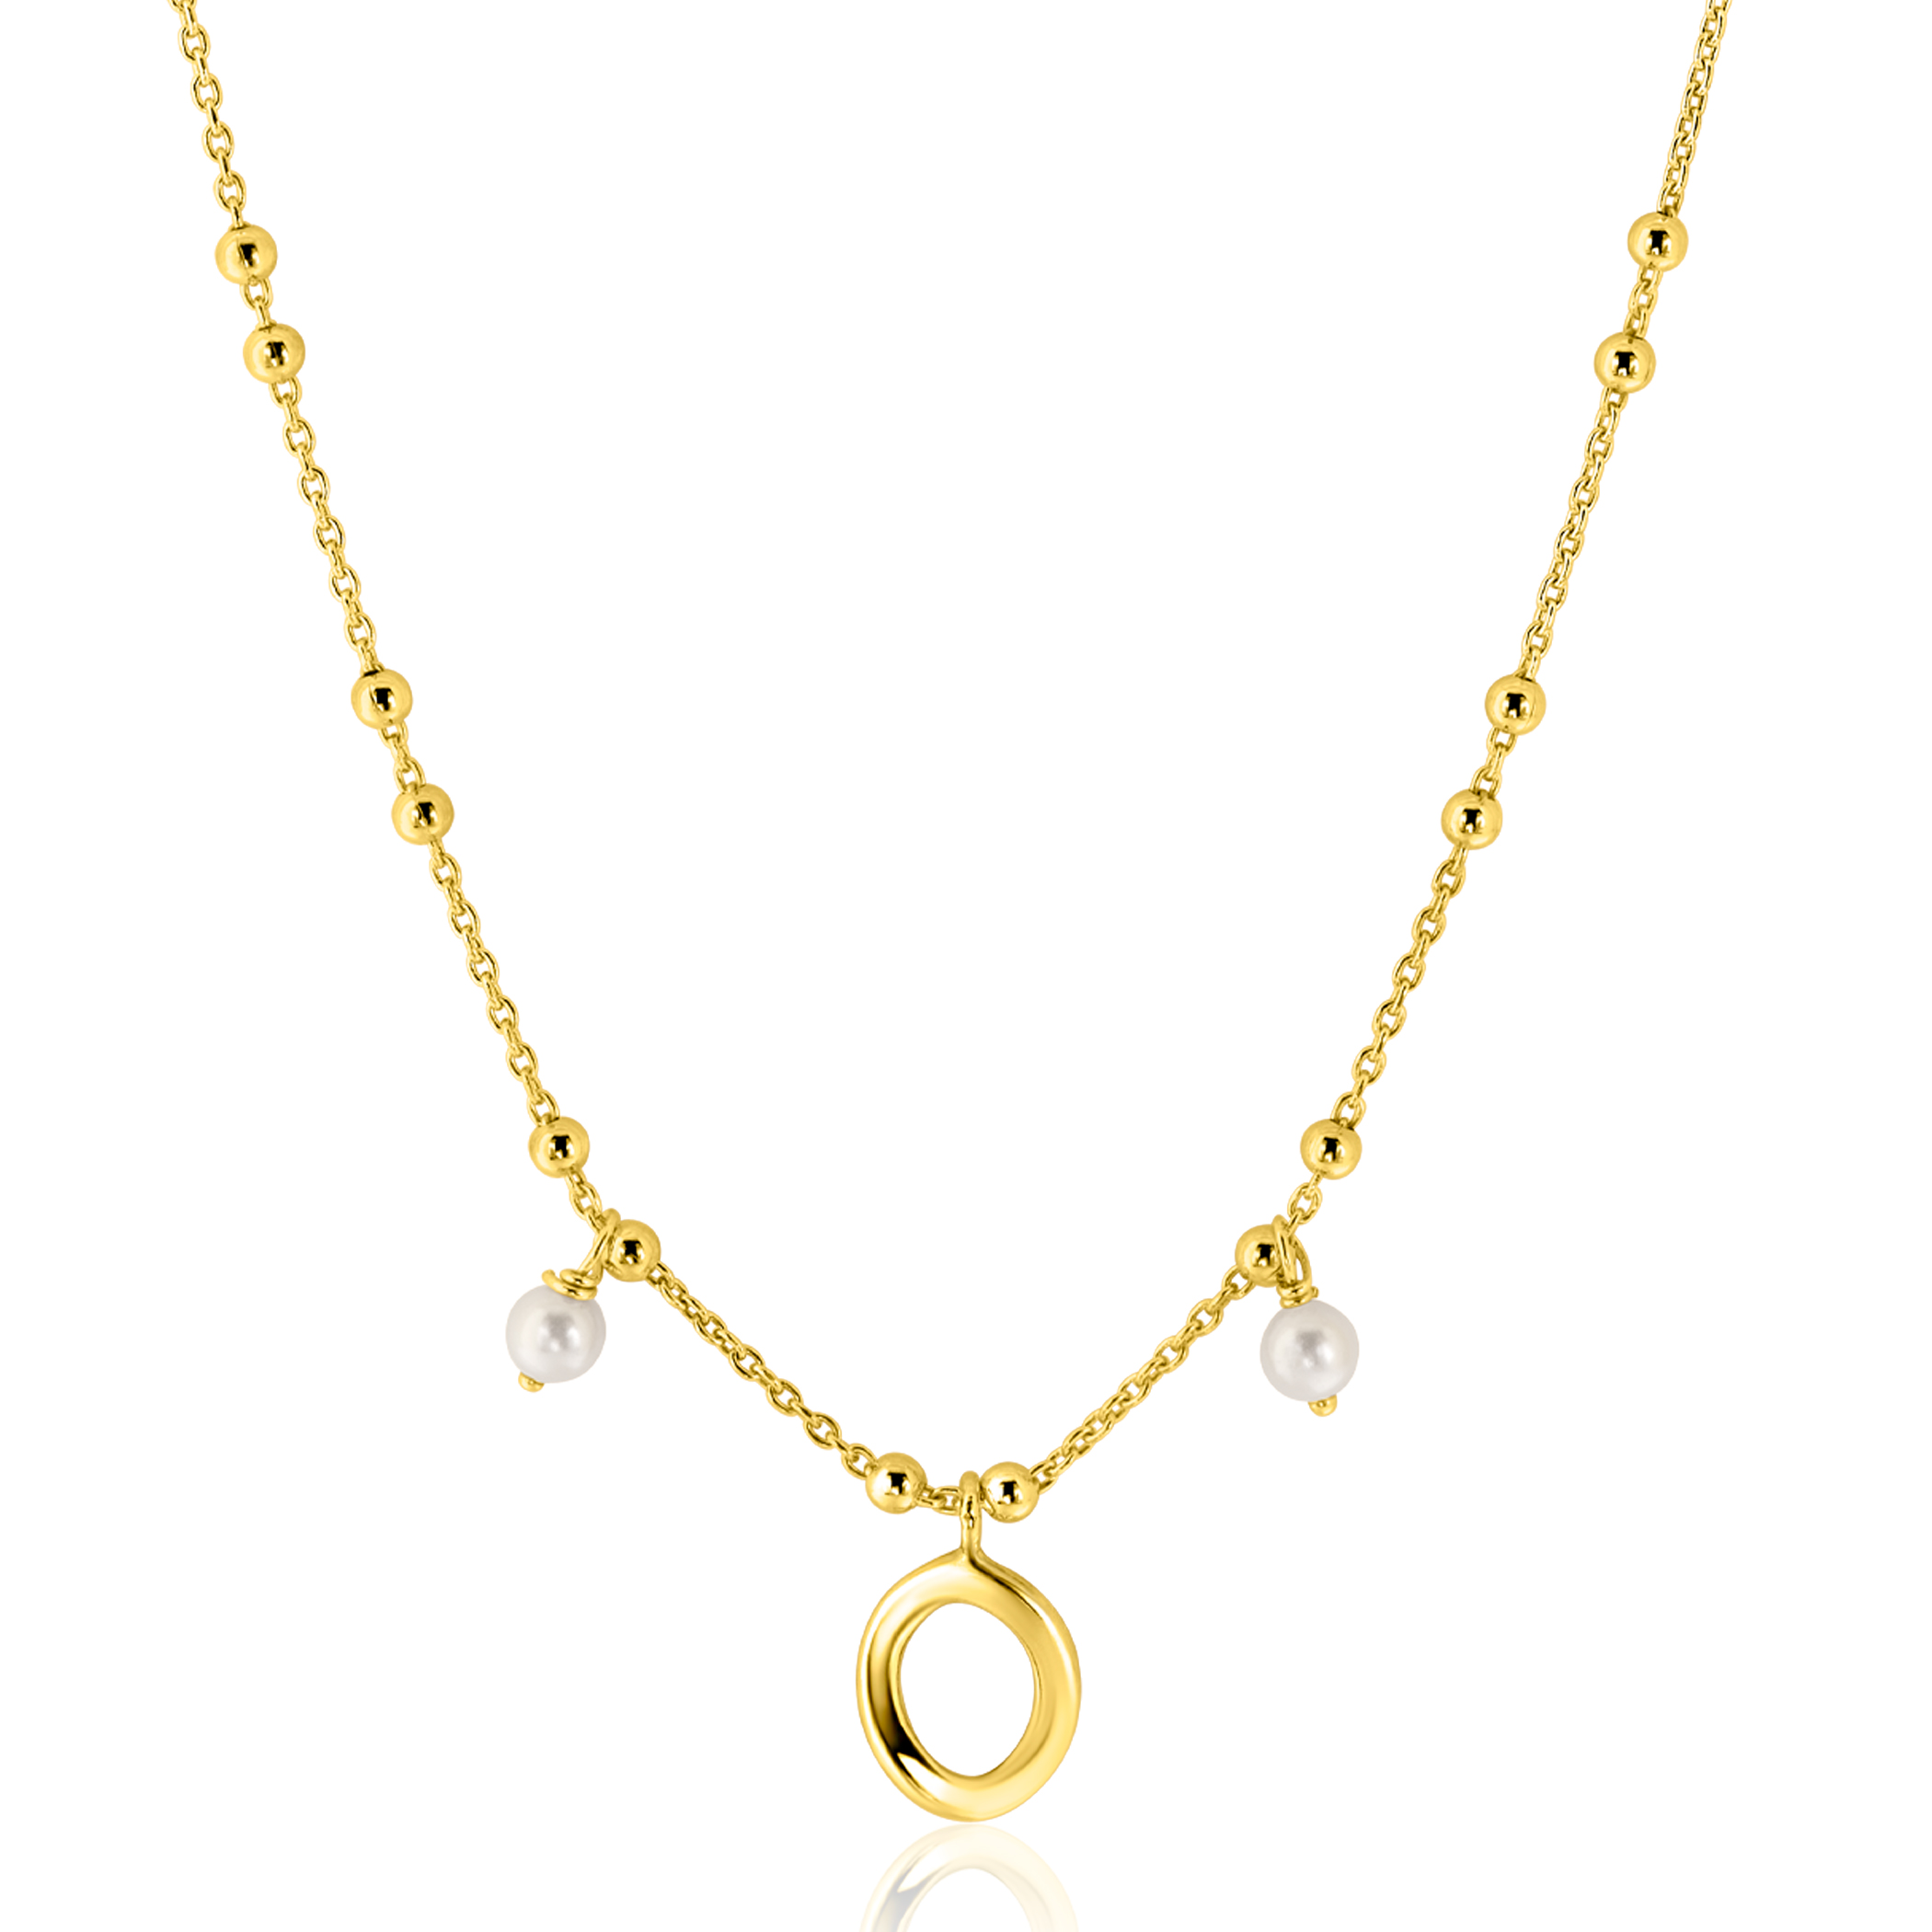 ZINZI Gold Plated Sterling Silver Fantasy Necklace with 15 Small Beads, 2 White Pearls and a Playful Organic Open Design 42-45cm ZIC2405